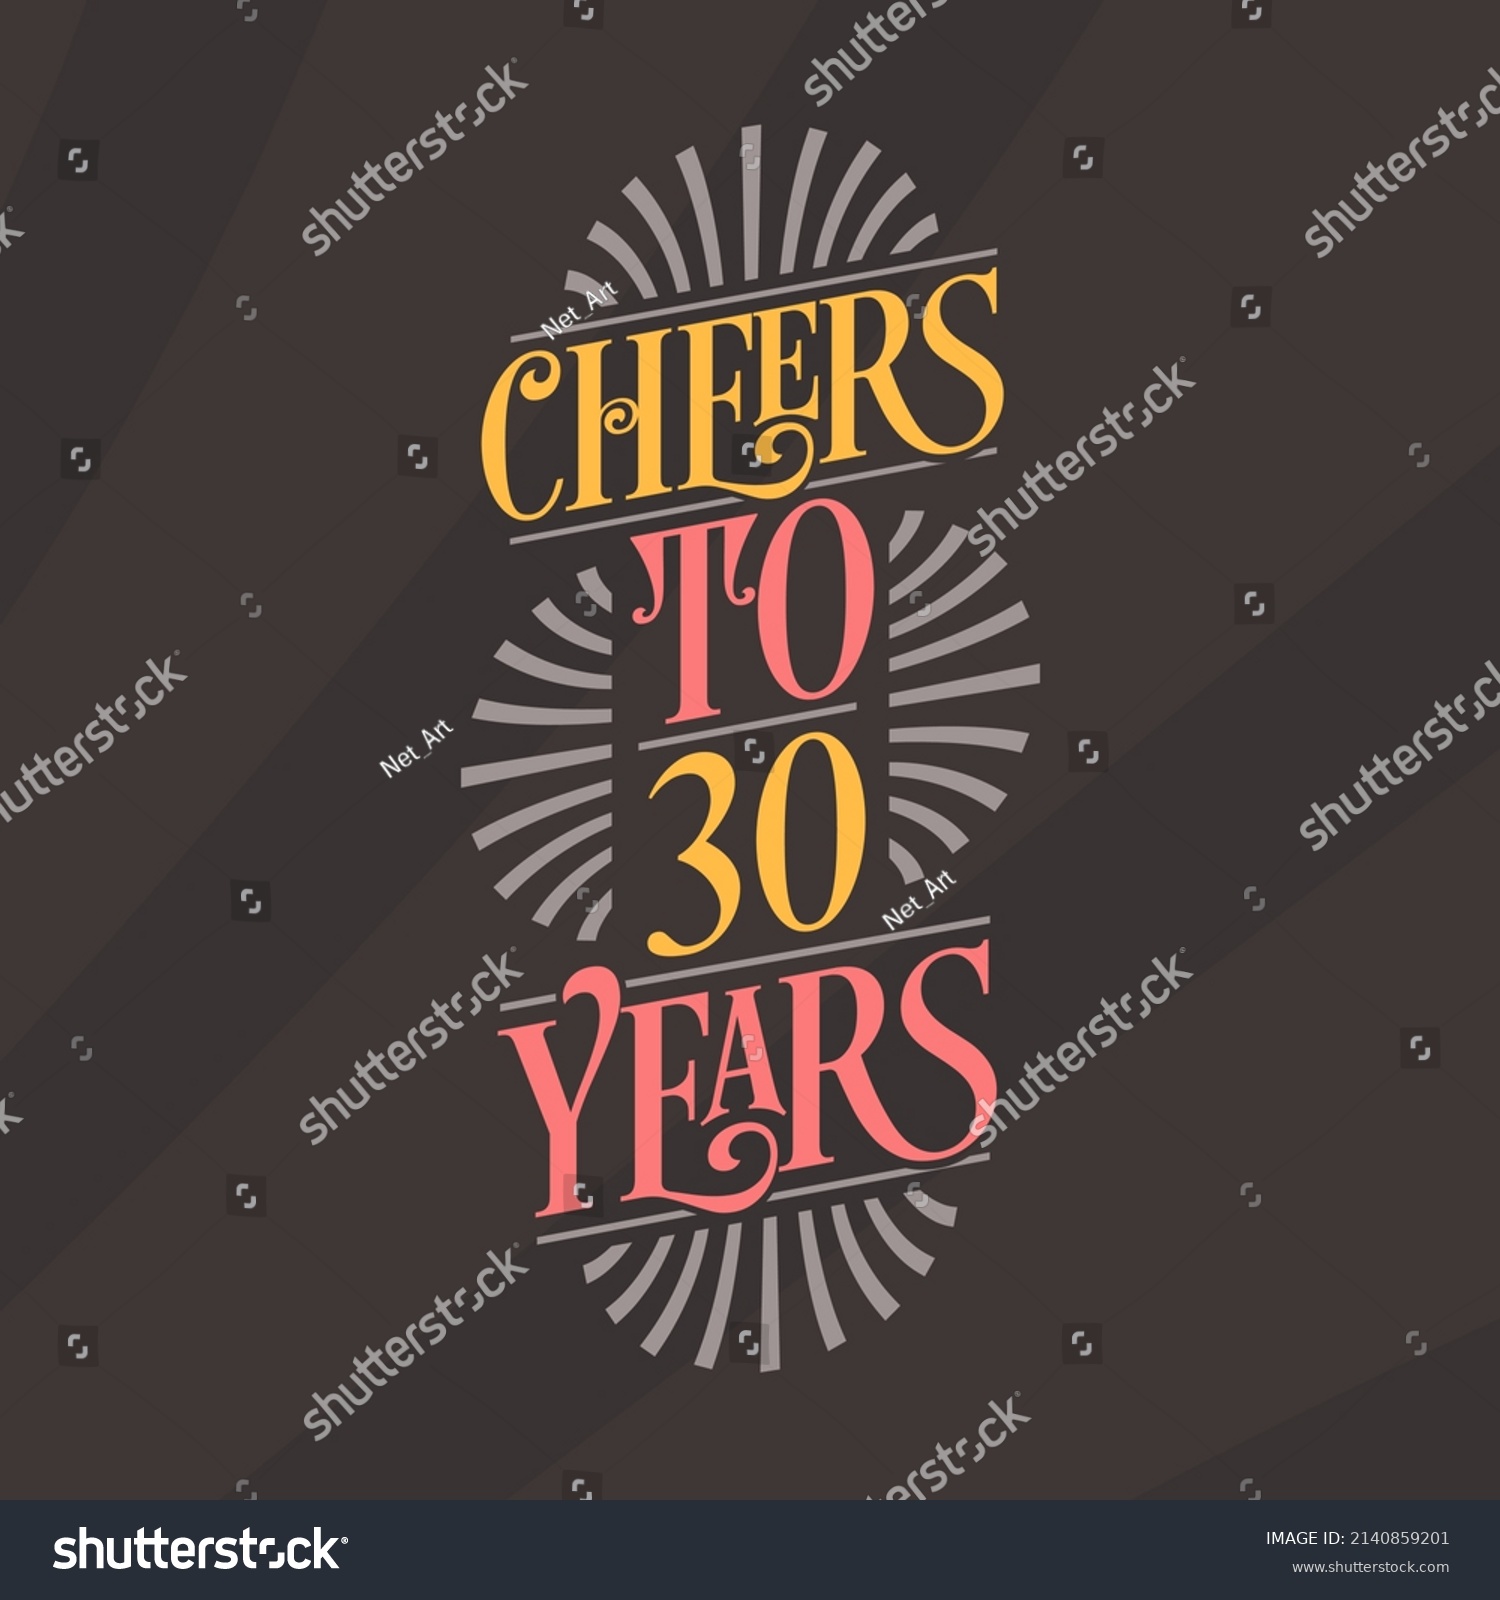 SVG of Cheers to 30 years, 30th birthday celebration svg